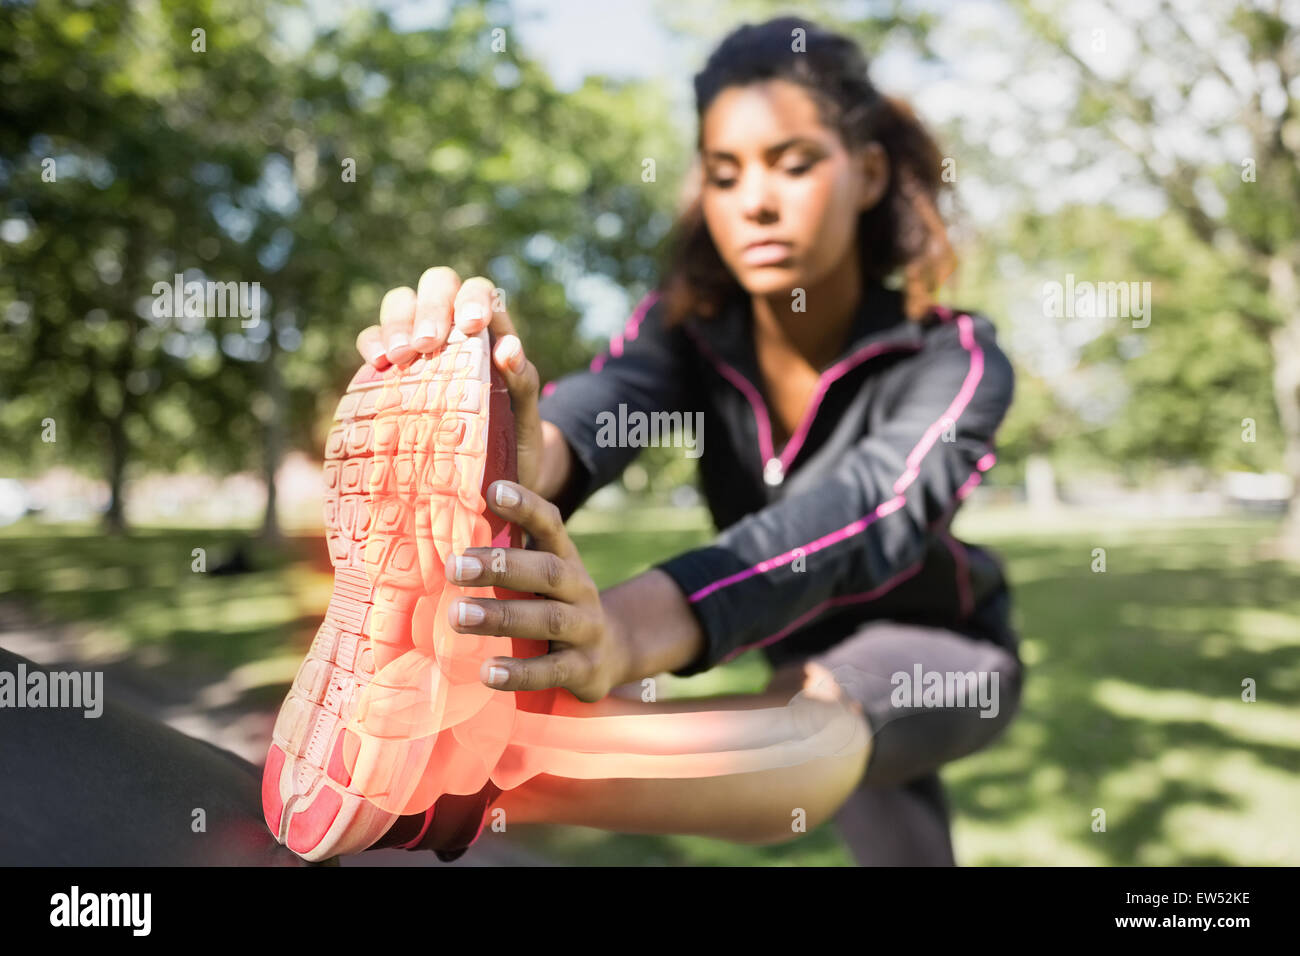 Highlighted ankle of stretching woman Stock Photo